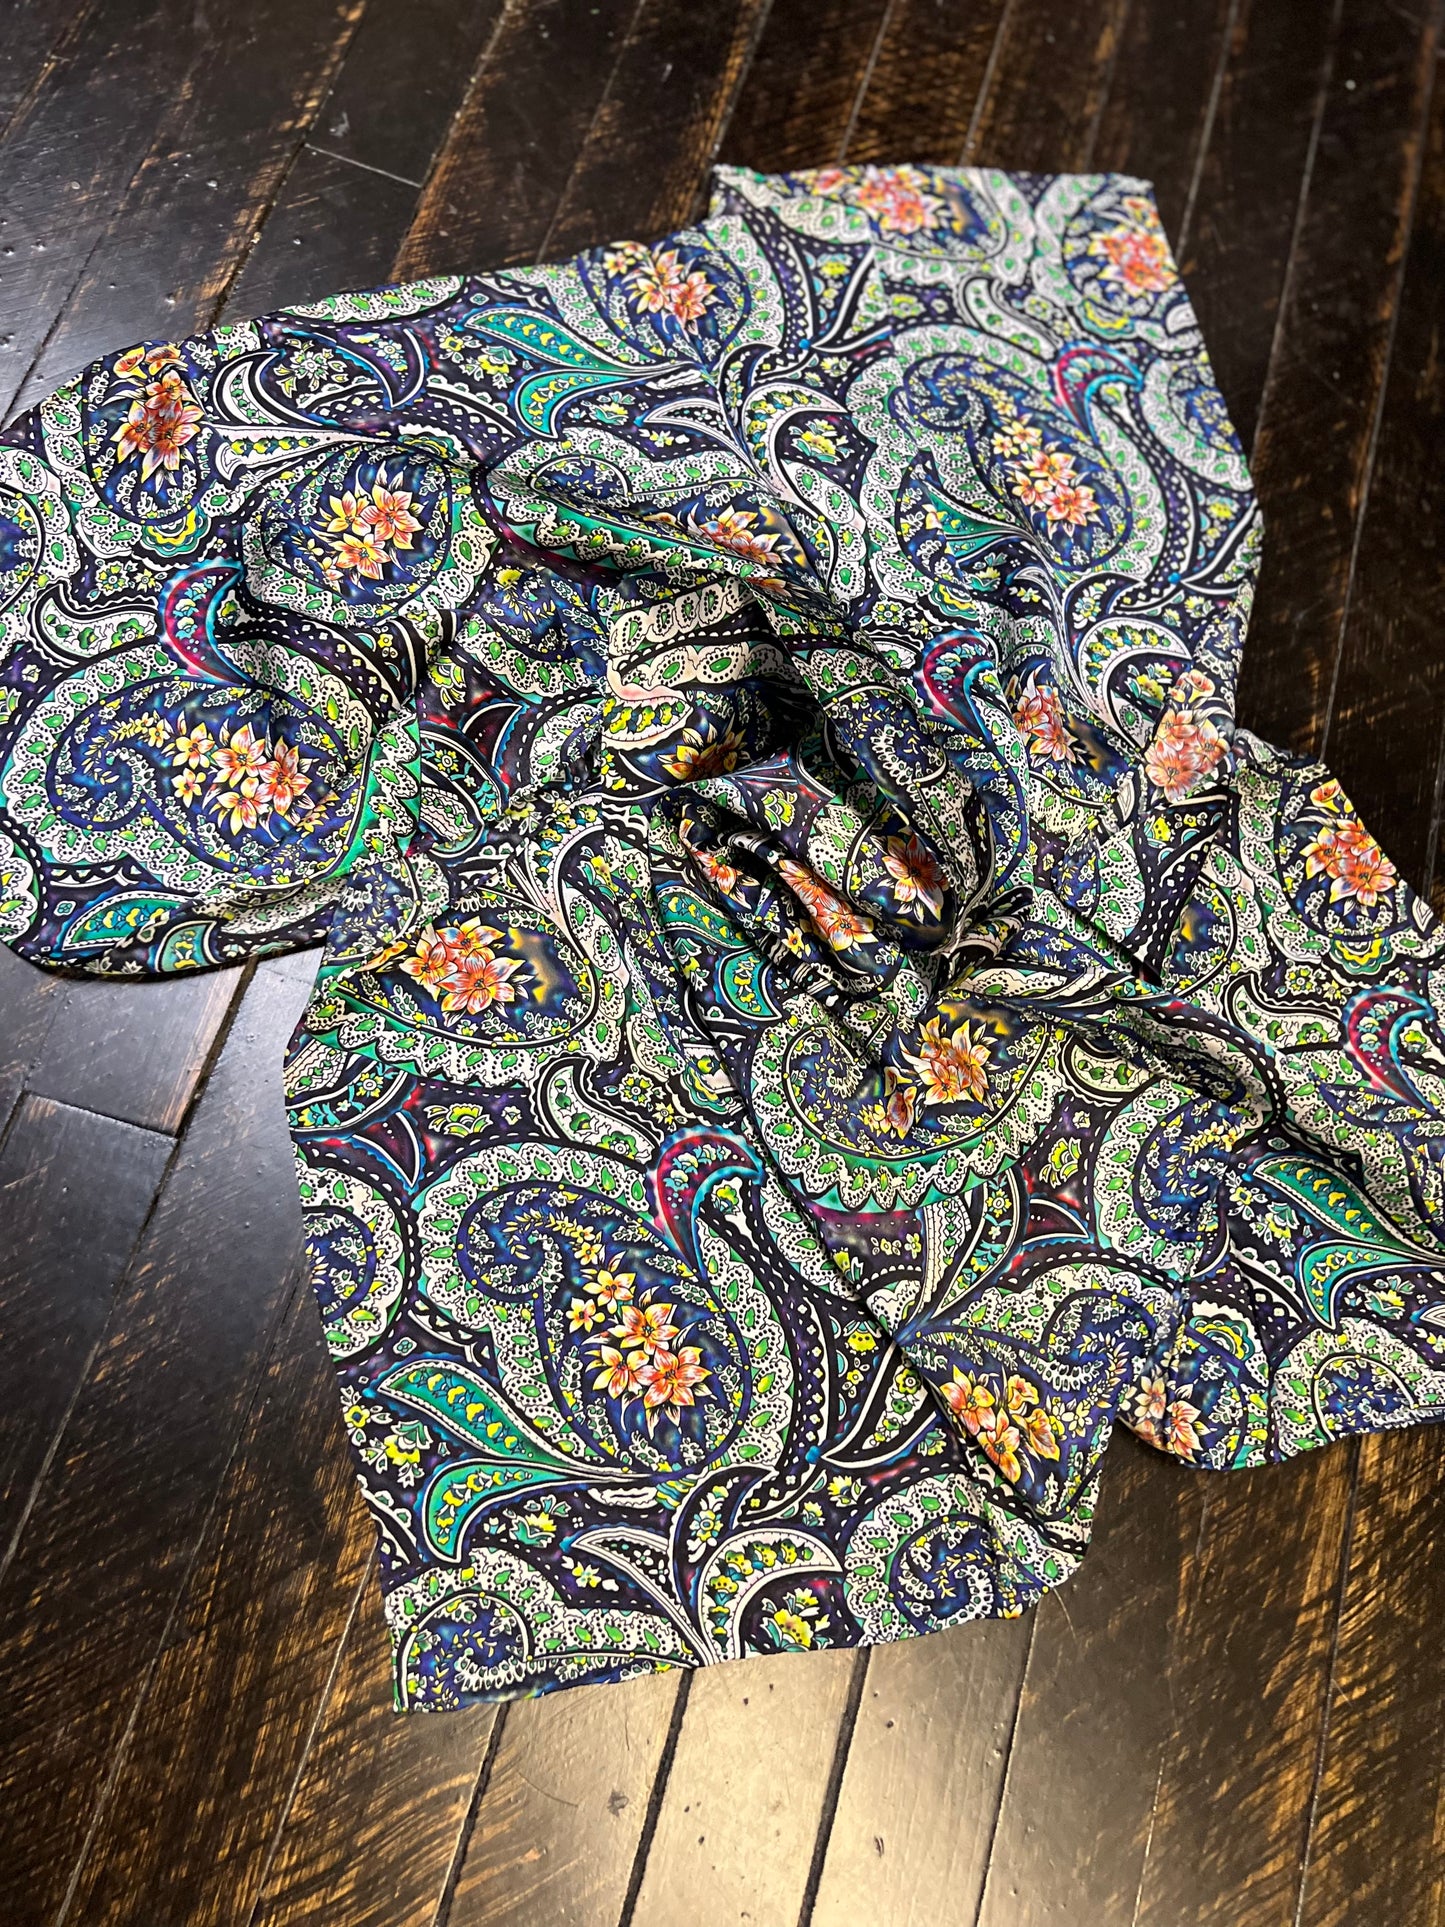 Floral Paisley Wild Rag - full size